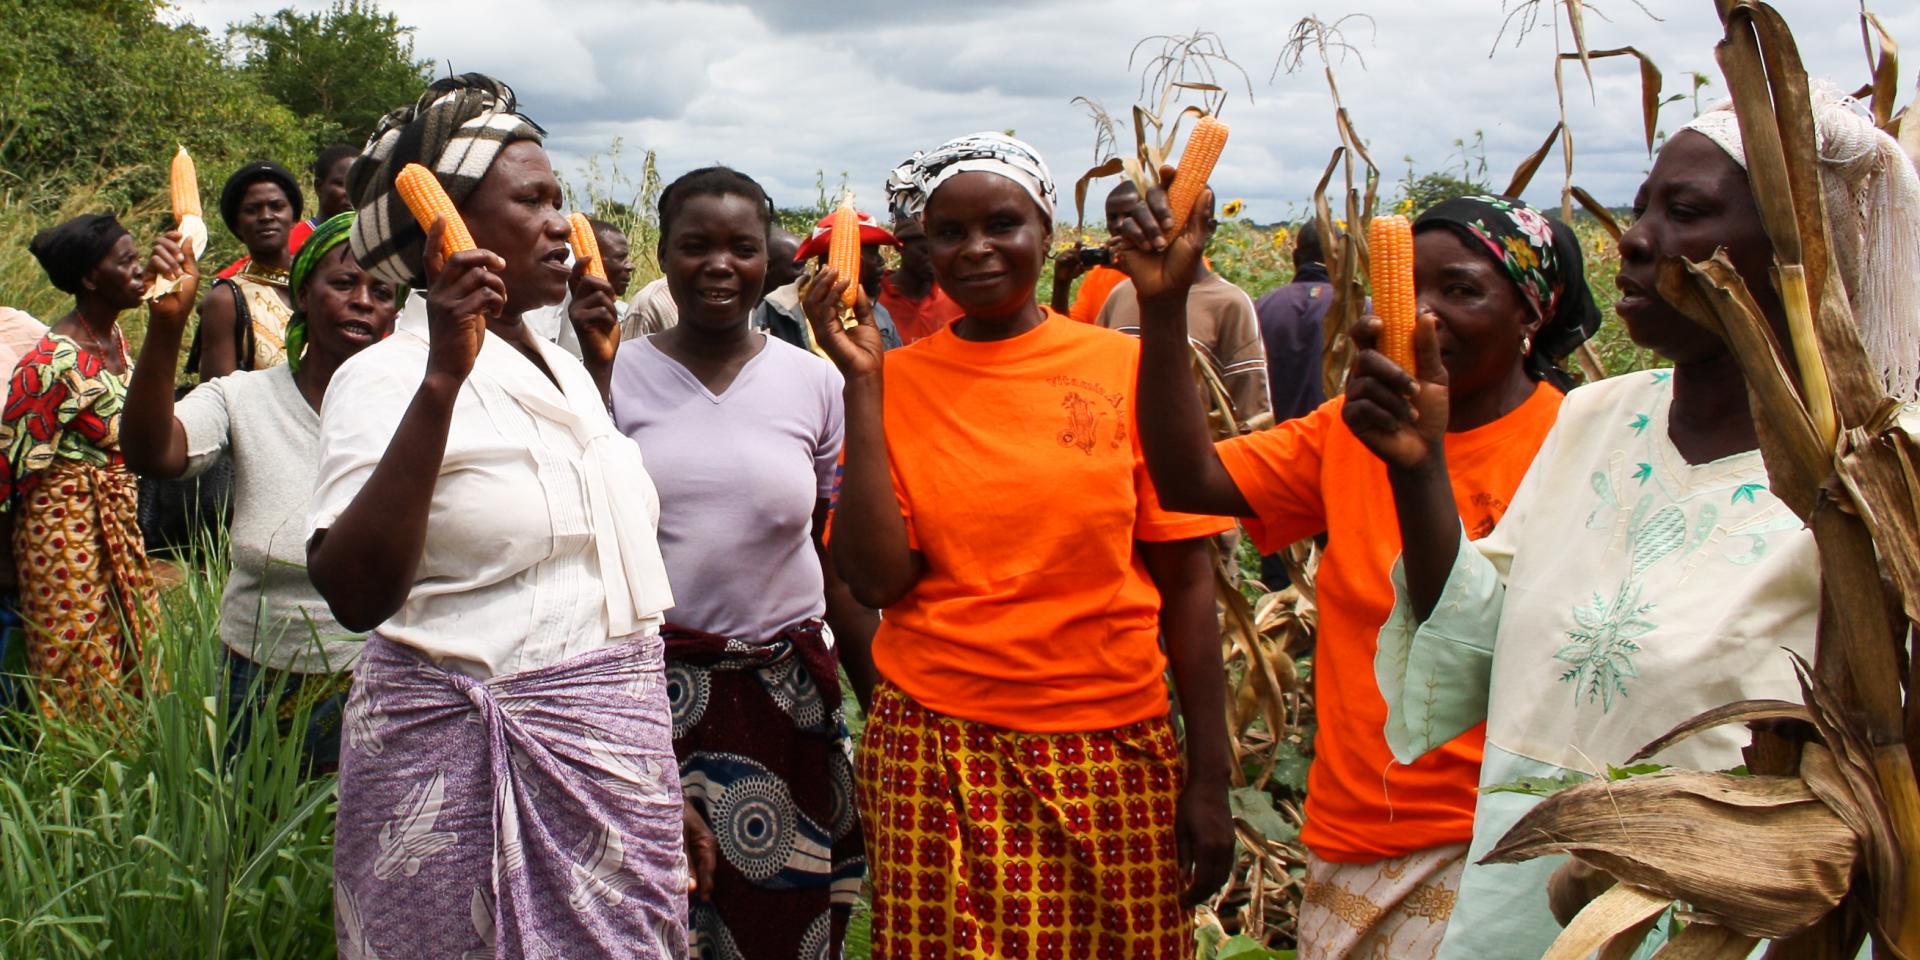 Women with Vitamin A maize in Zambia. Photo: HarvestPlus.